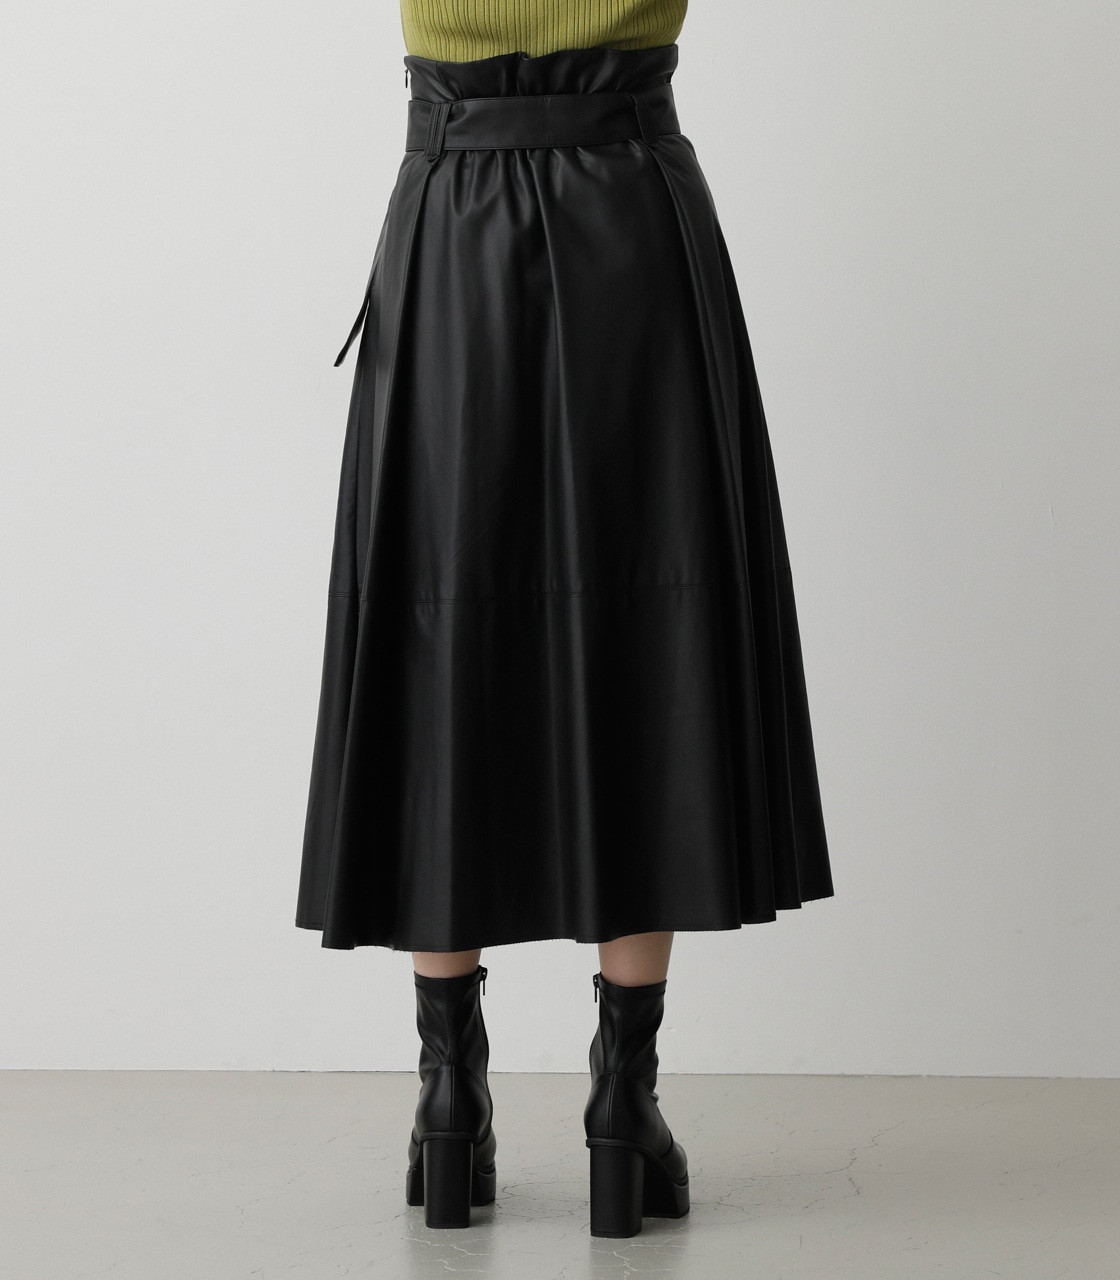 FAUX LEATHER HIGH WAIST SKIRT/フェイクレザーハイウエストスカート 詳細画像 BLK 7